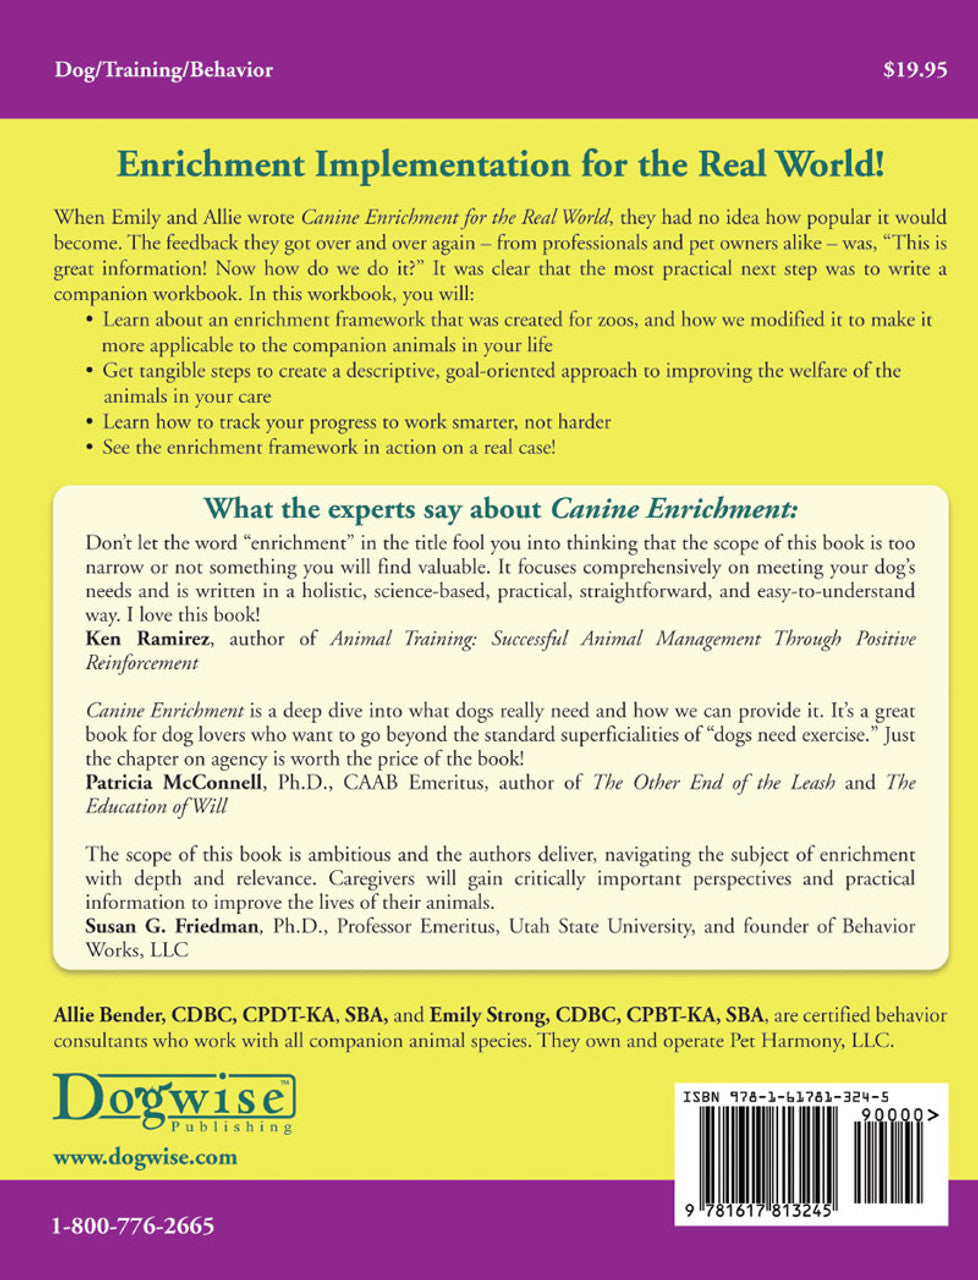 Canine Enrichment for the Real World - WORKBOOK